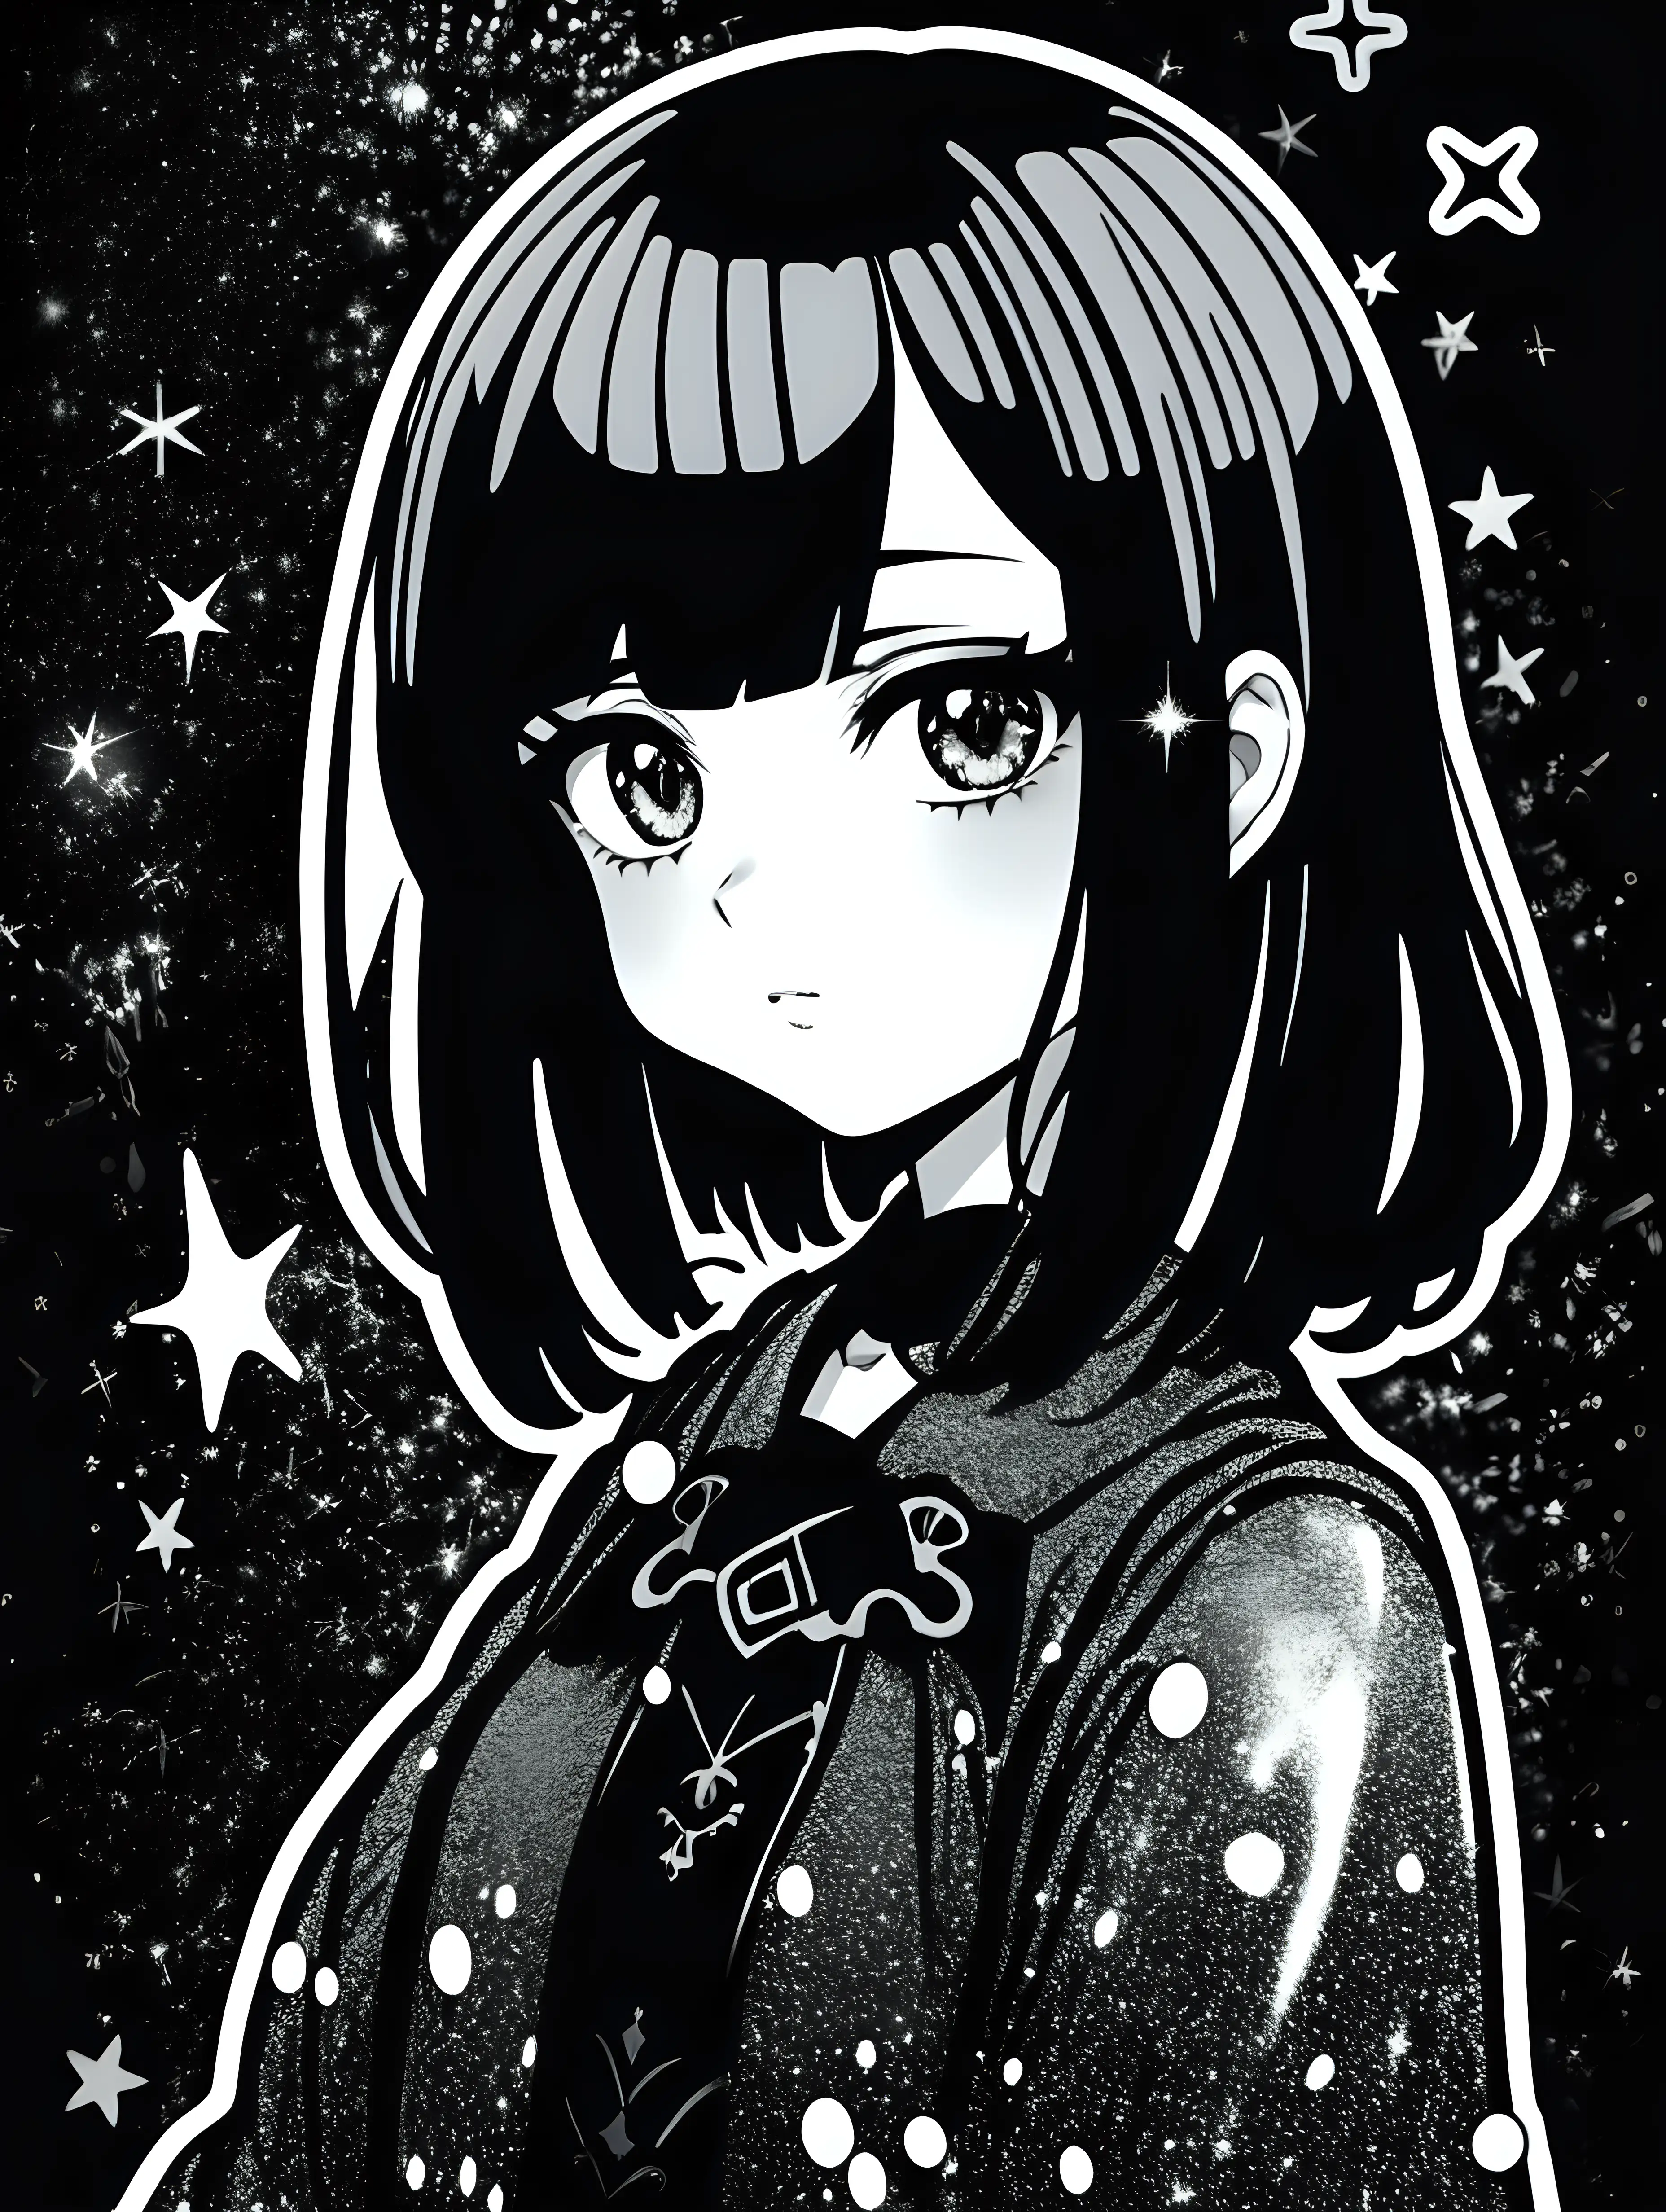 Mysterious Gothic Anime Woman Amidst Black and White Sparkles